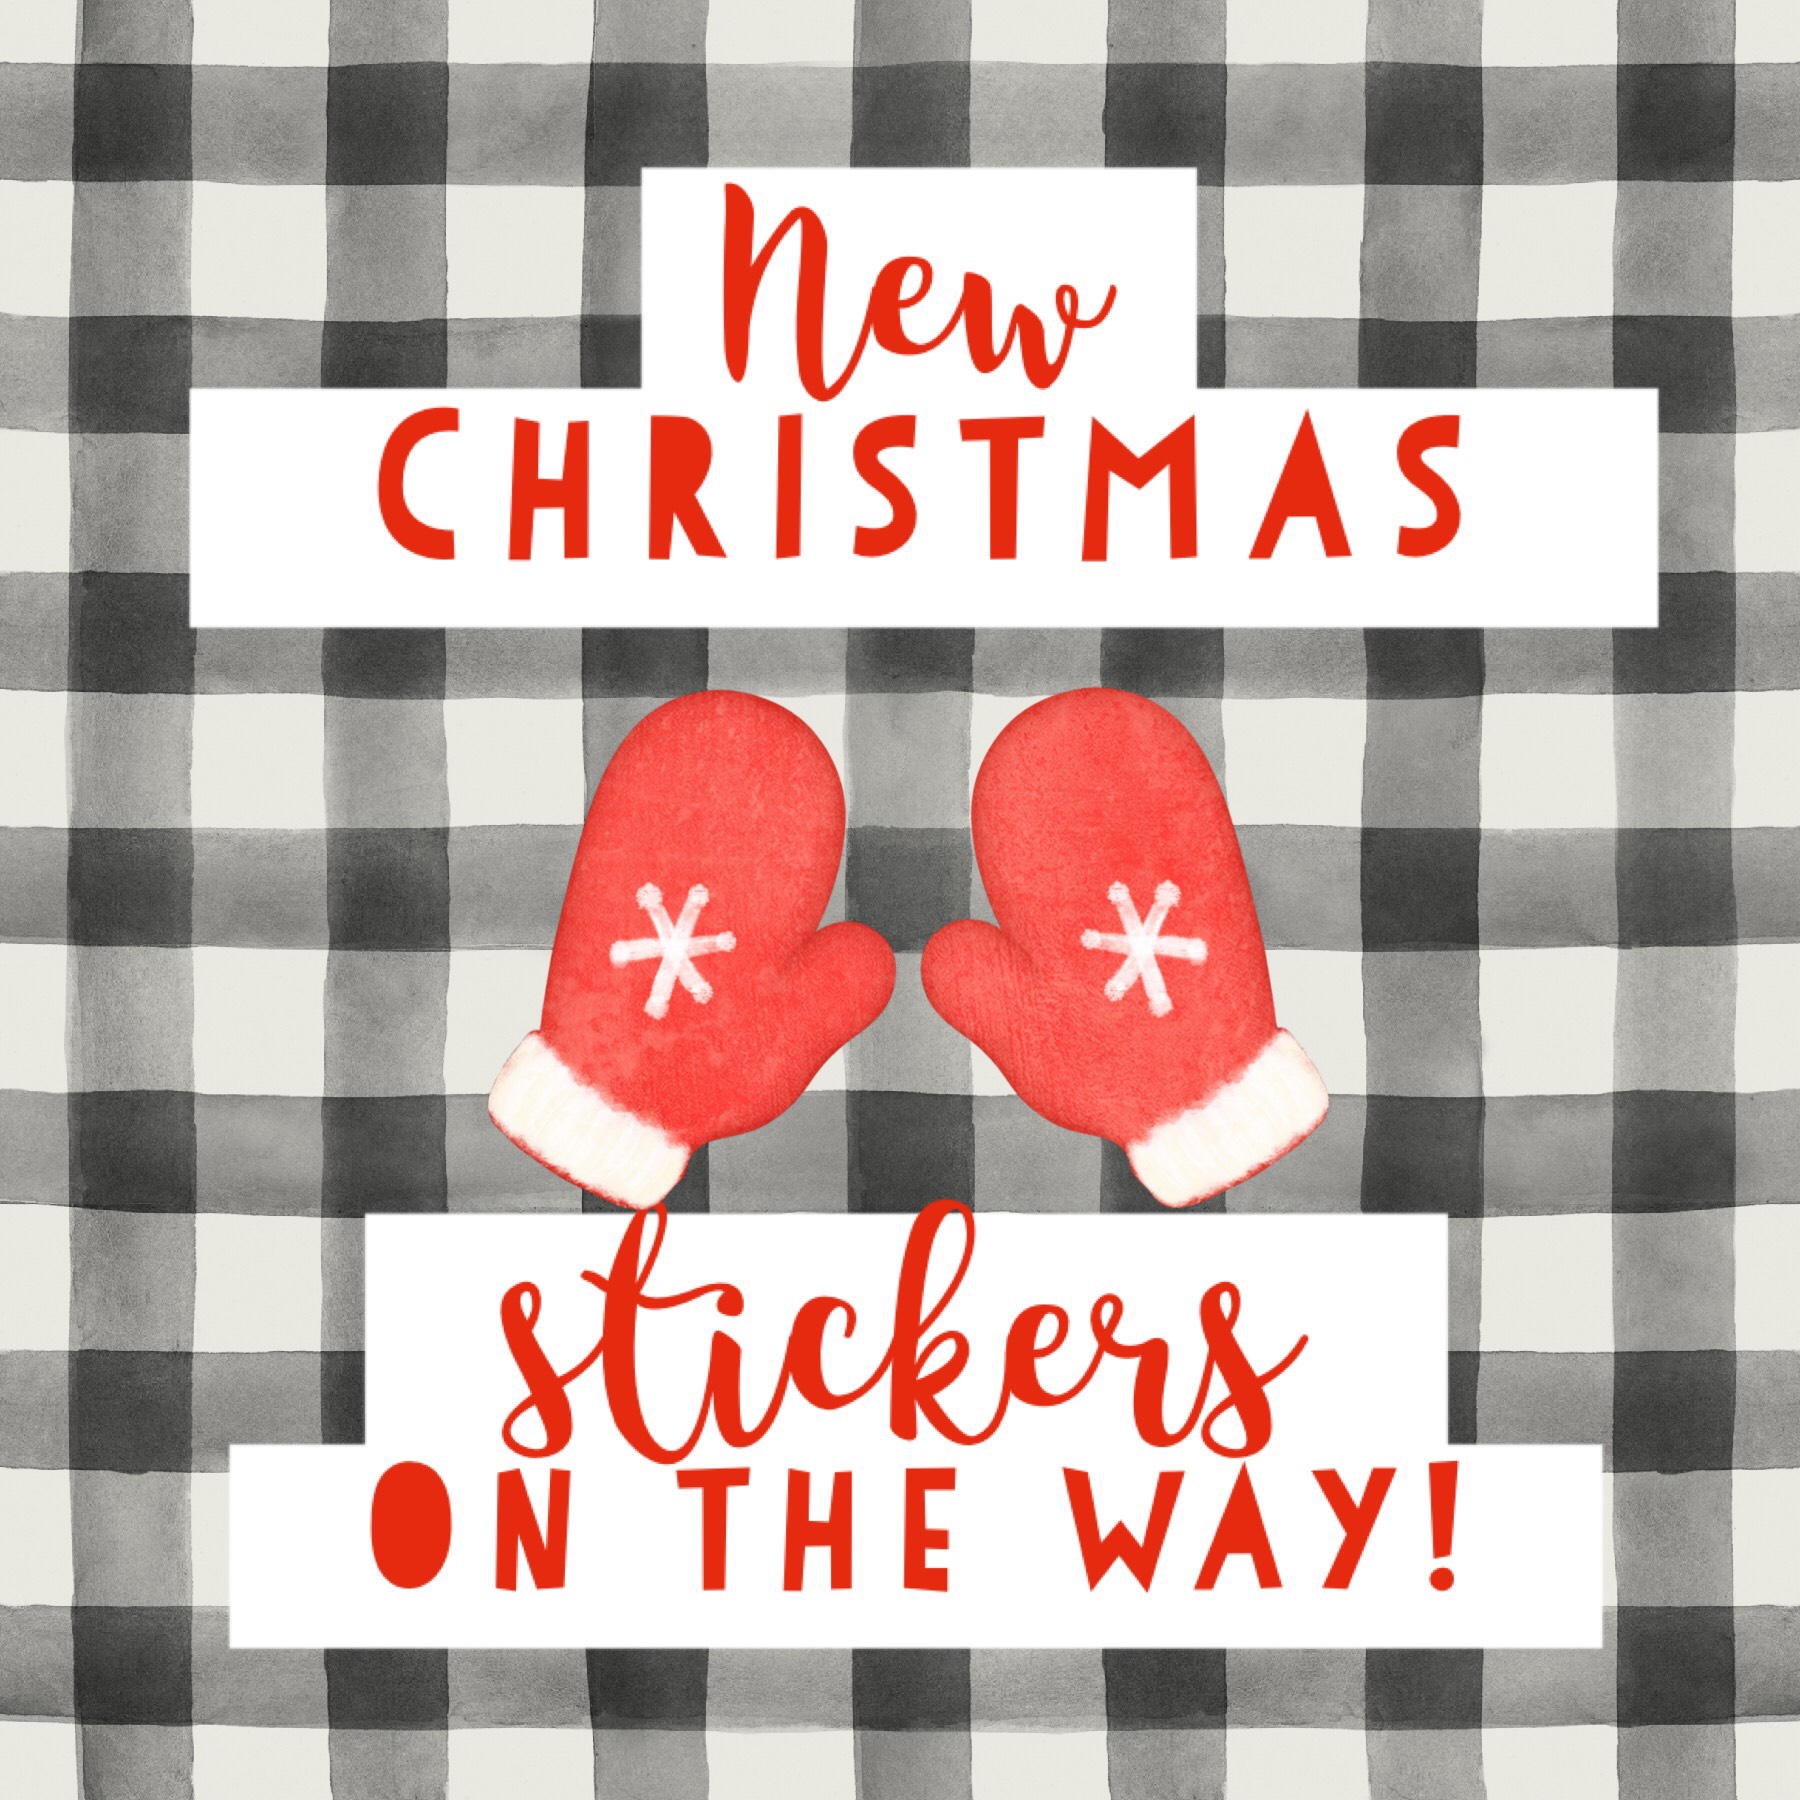 🌲NEW CHRISTMAS STICKERS!
@PicCollage #Christmas #Piccollage #winter @everestandgray